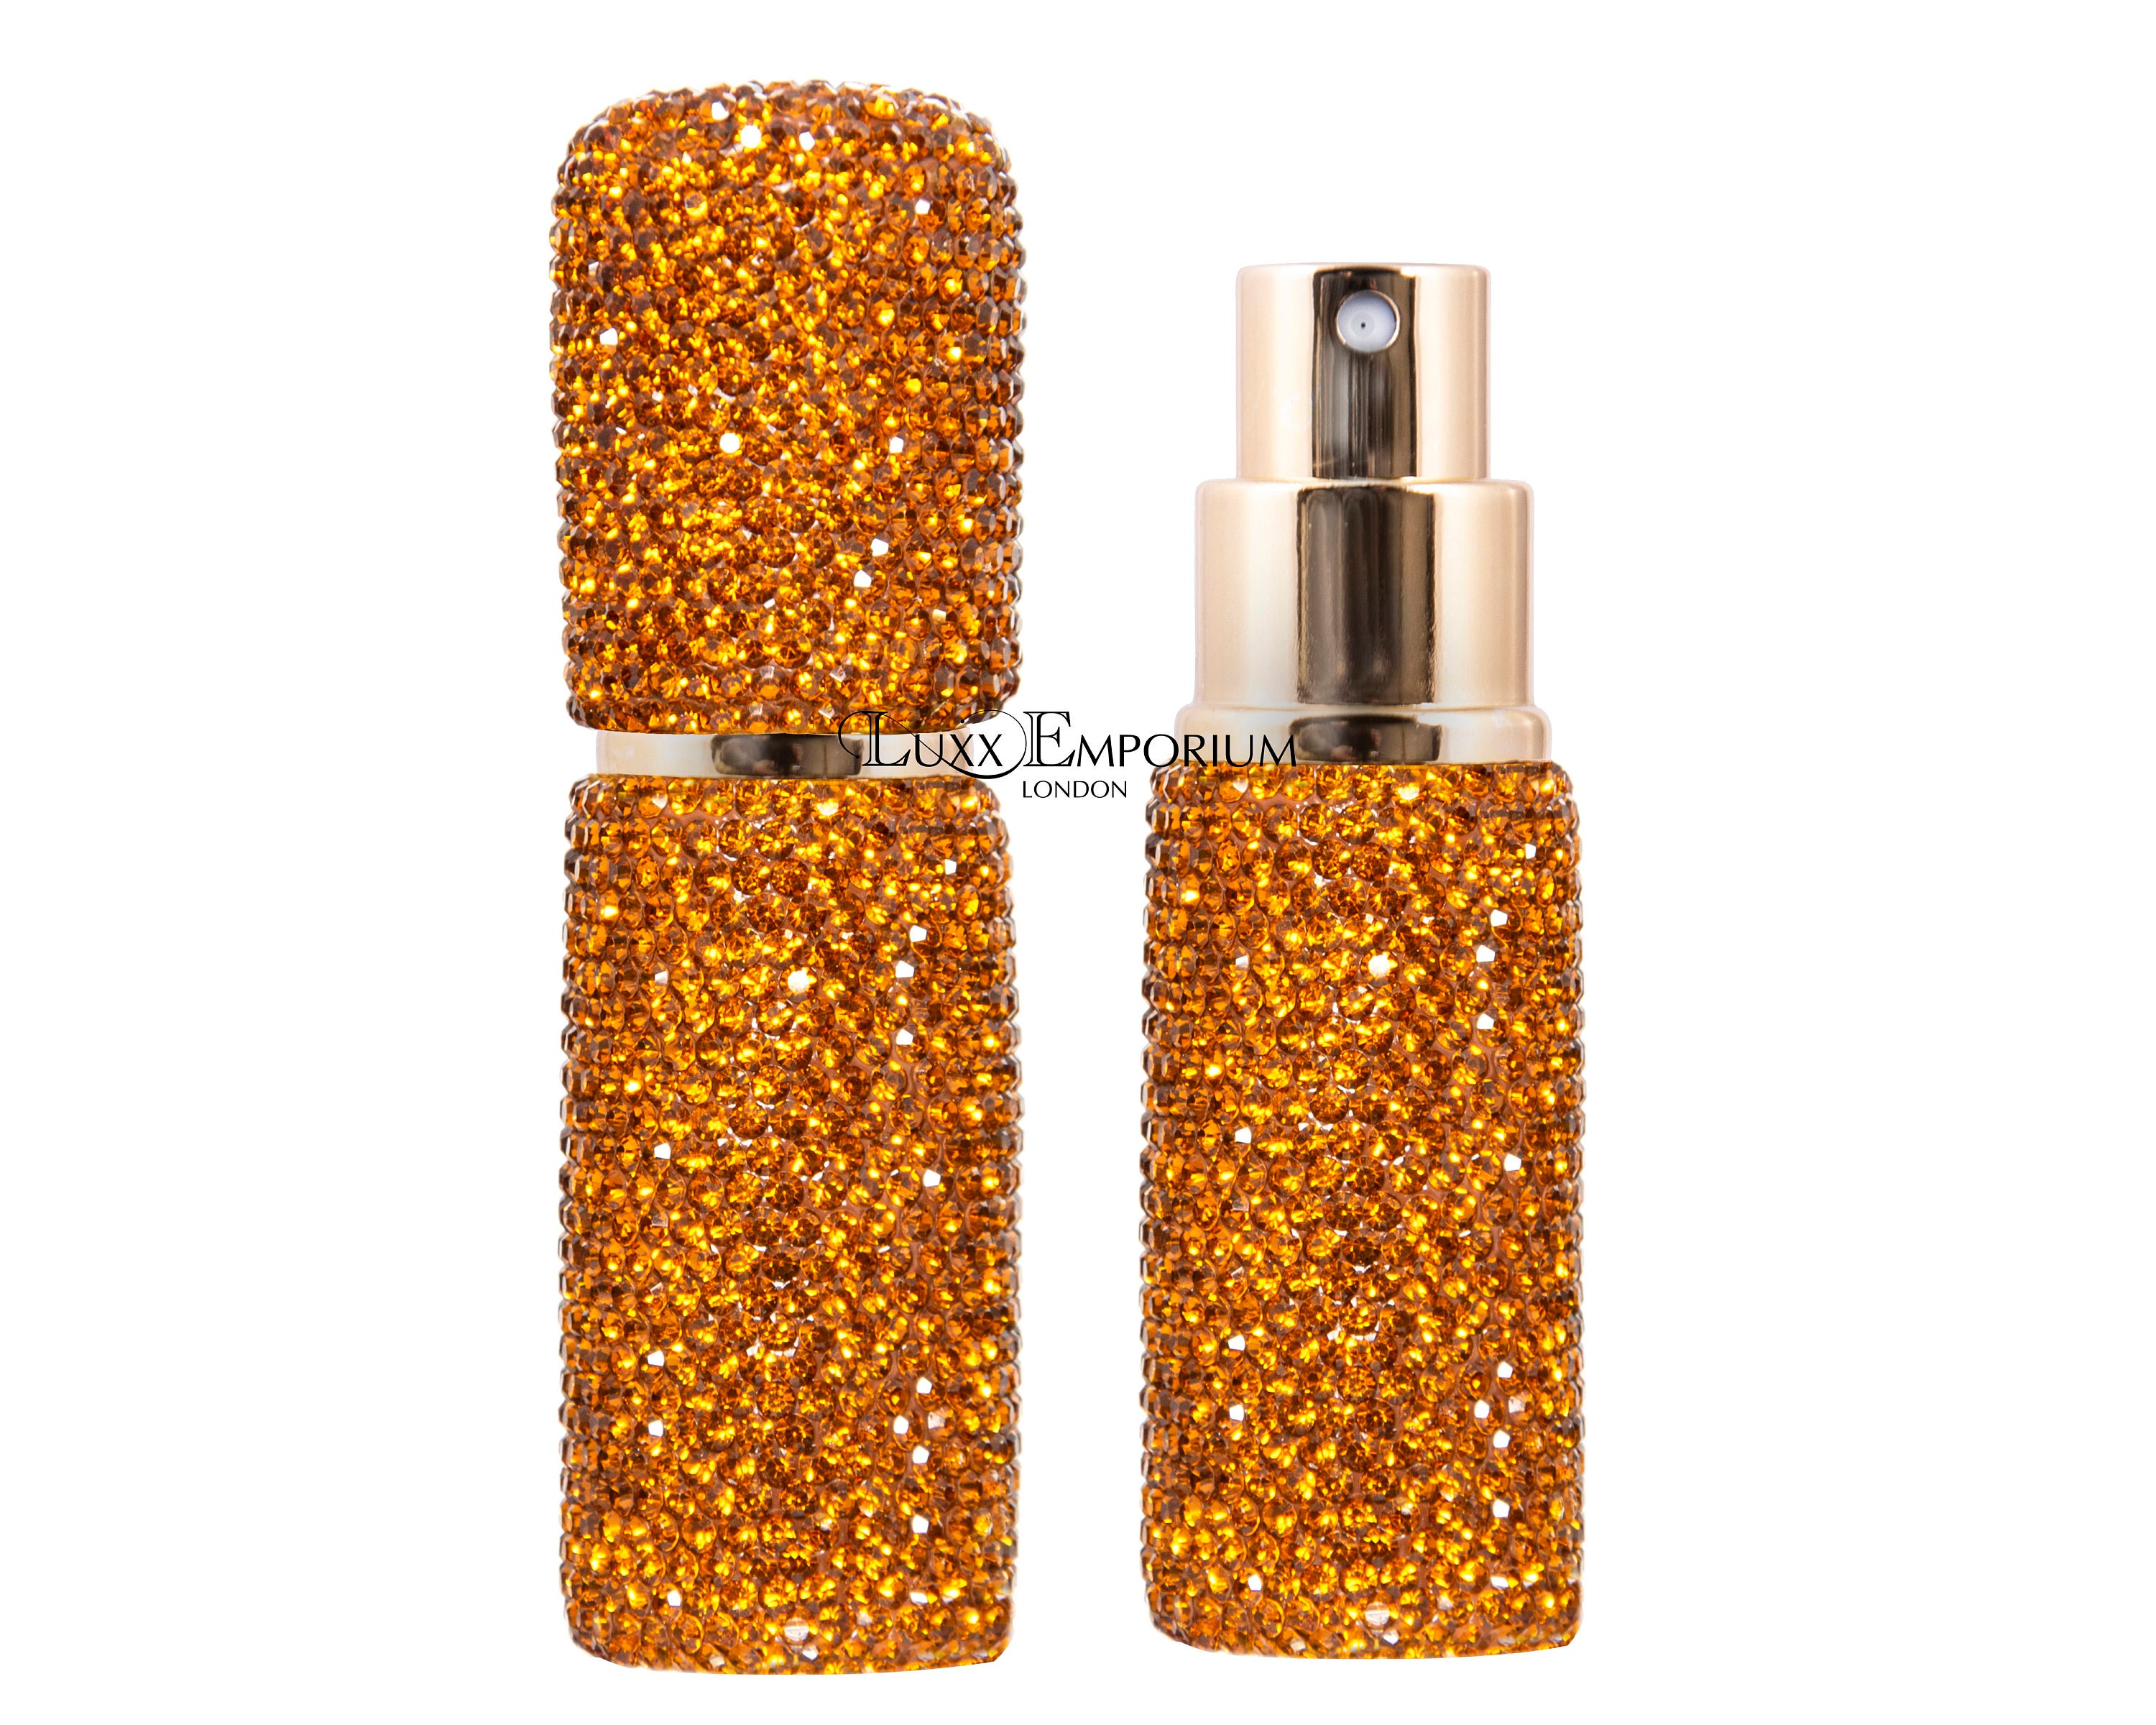 AUTHENTIC LOUIS VUITTON LV TRAVEL ATOMIZER FOR FRAGRANCE REFILL